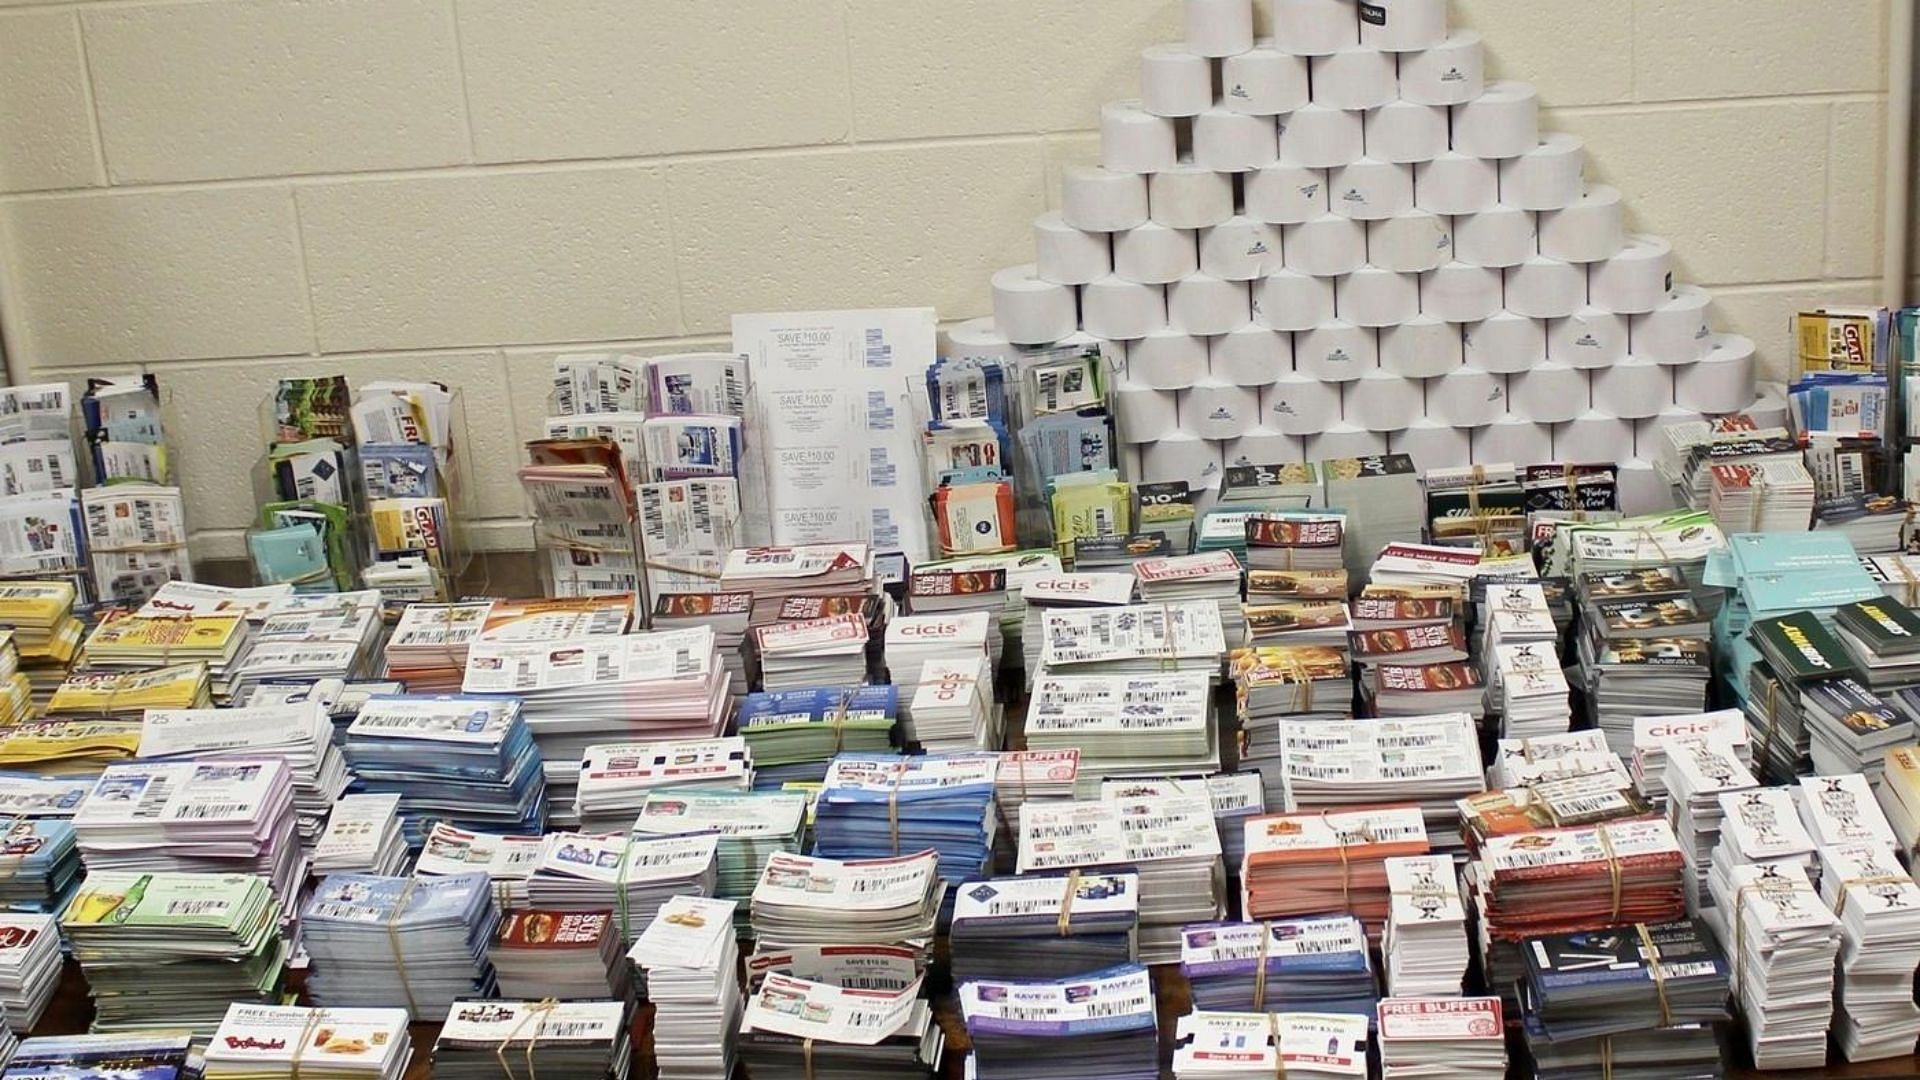 During investigation, authorities seized almost $1 million worth of counterfeit coupons from Talens&#039; residence (Image Via WRIC/Google)